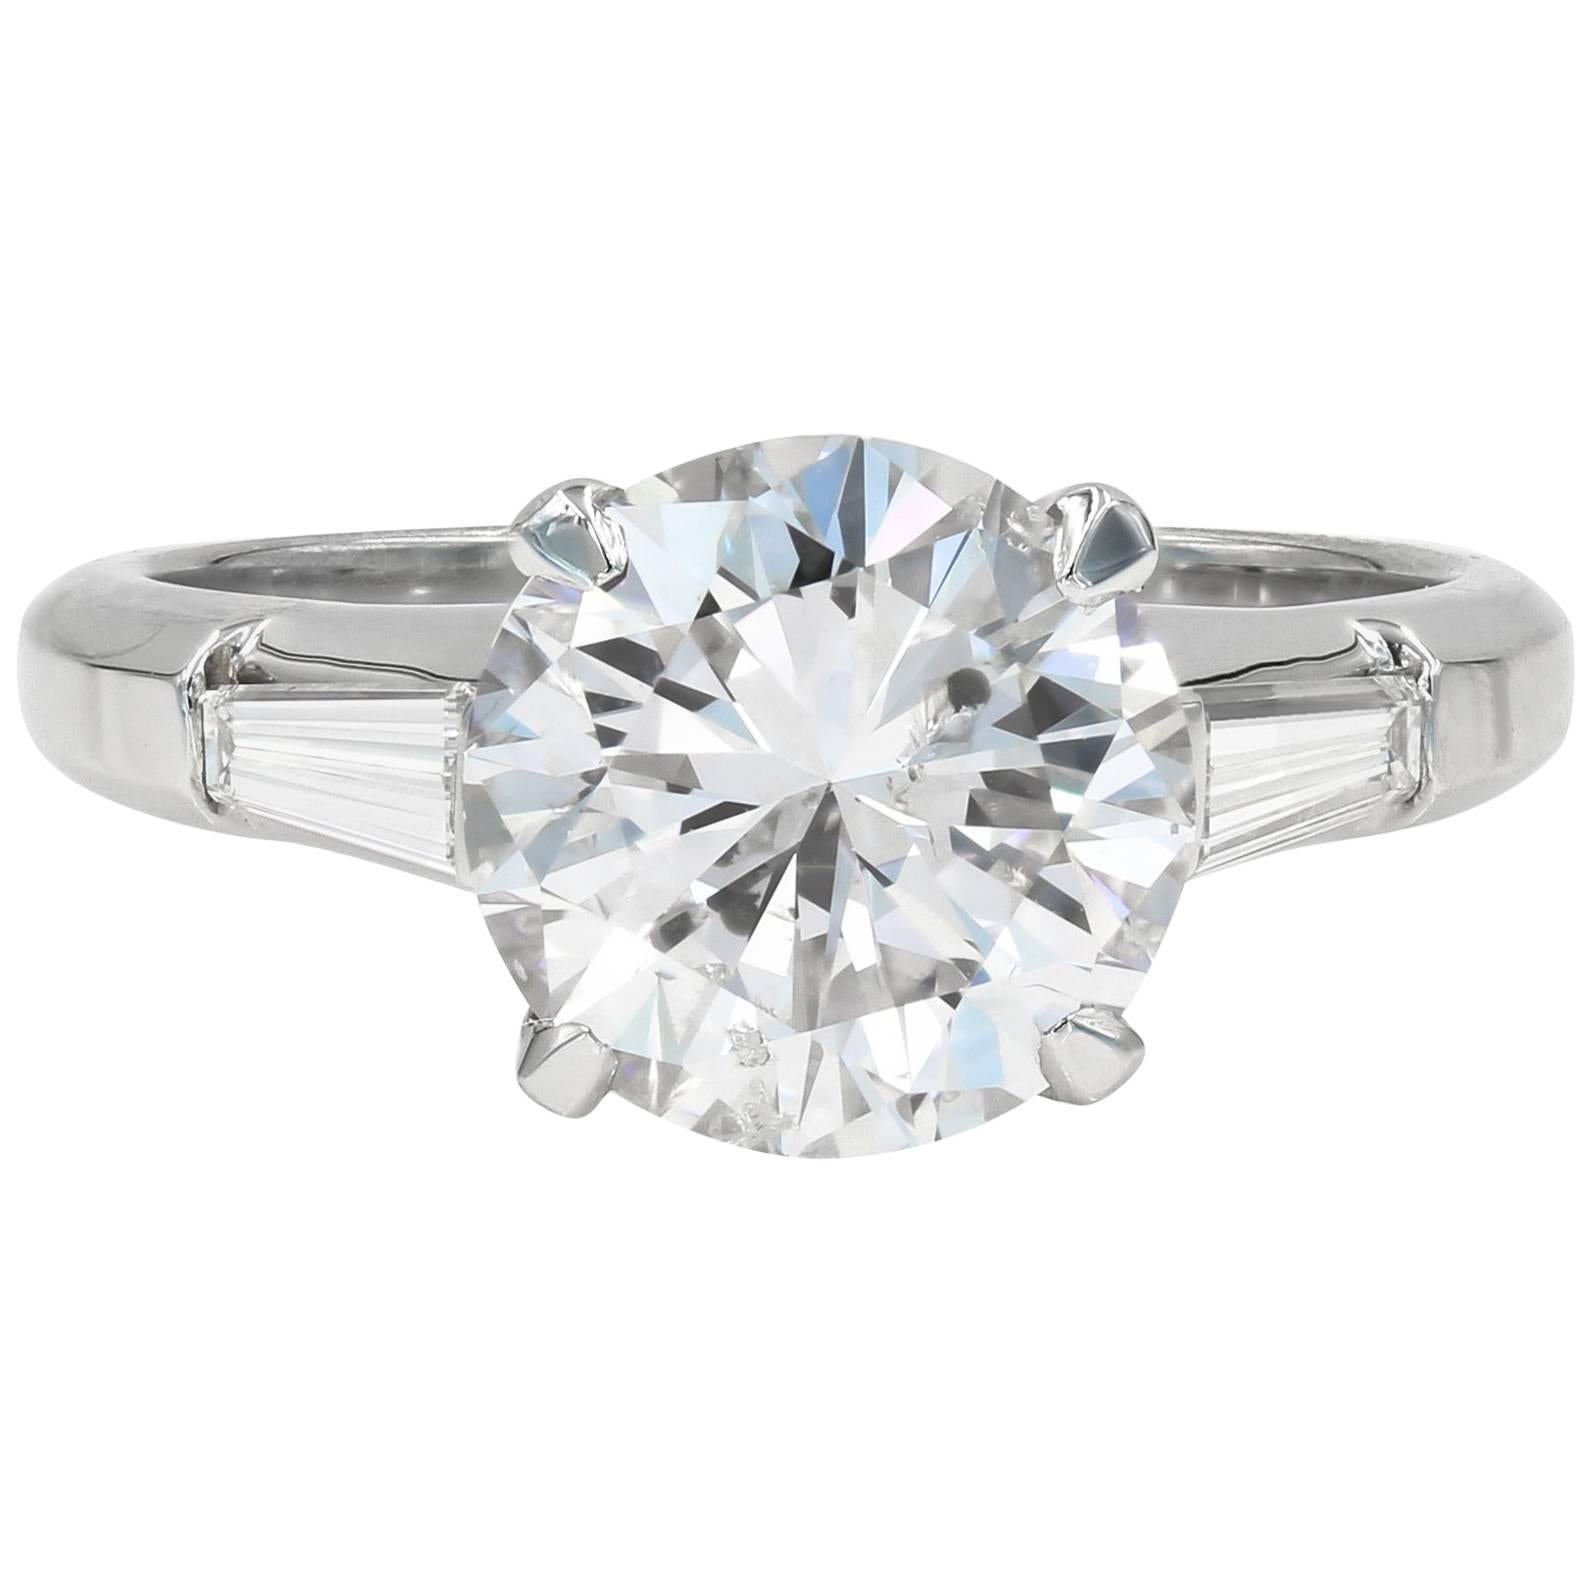 GIA Certified 3.03cts. Round Diamond set in a Lester Lampert Signature Mounting